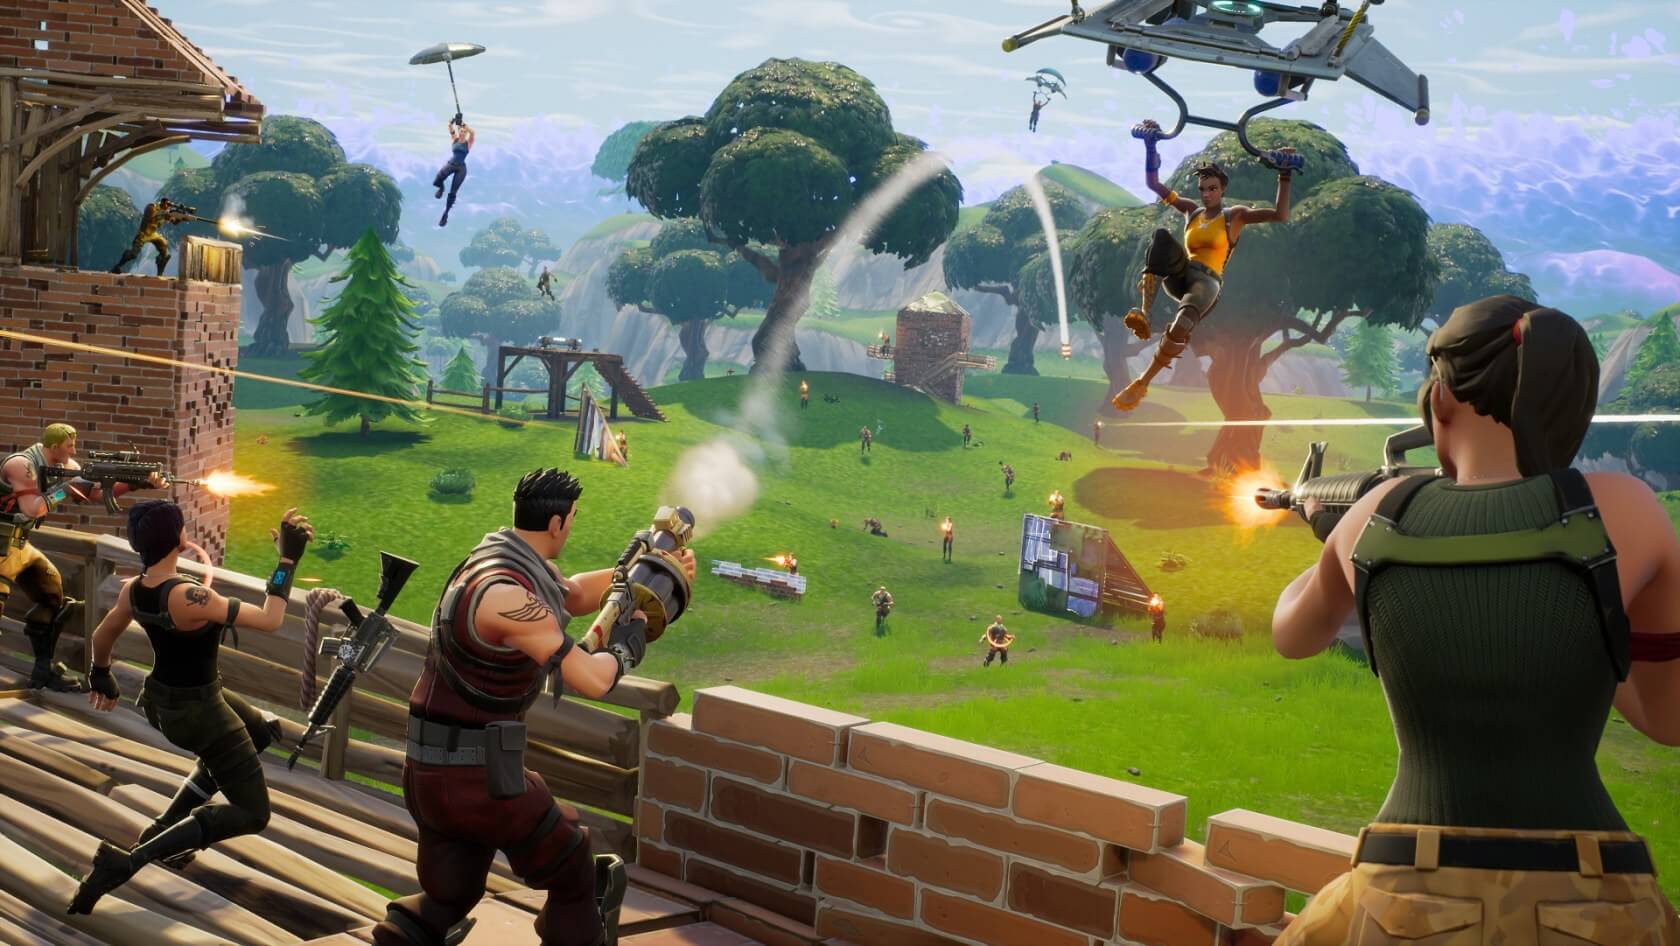 Judge stops Apple's threat to the Unreal Engine, but Fortnite stays off App Store